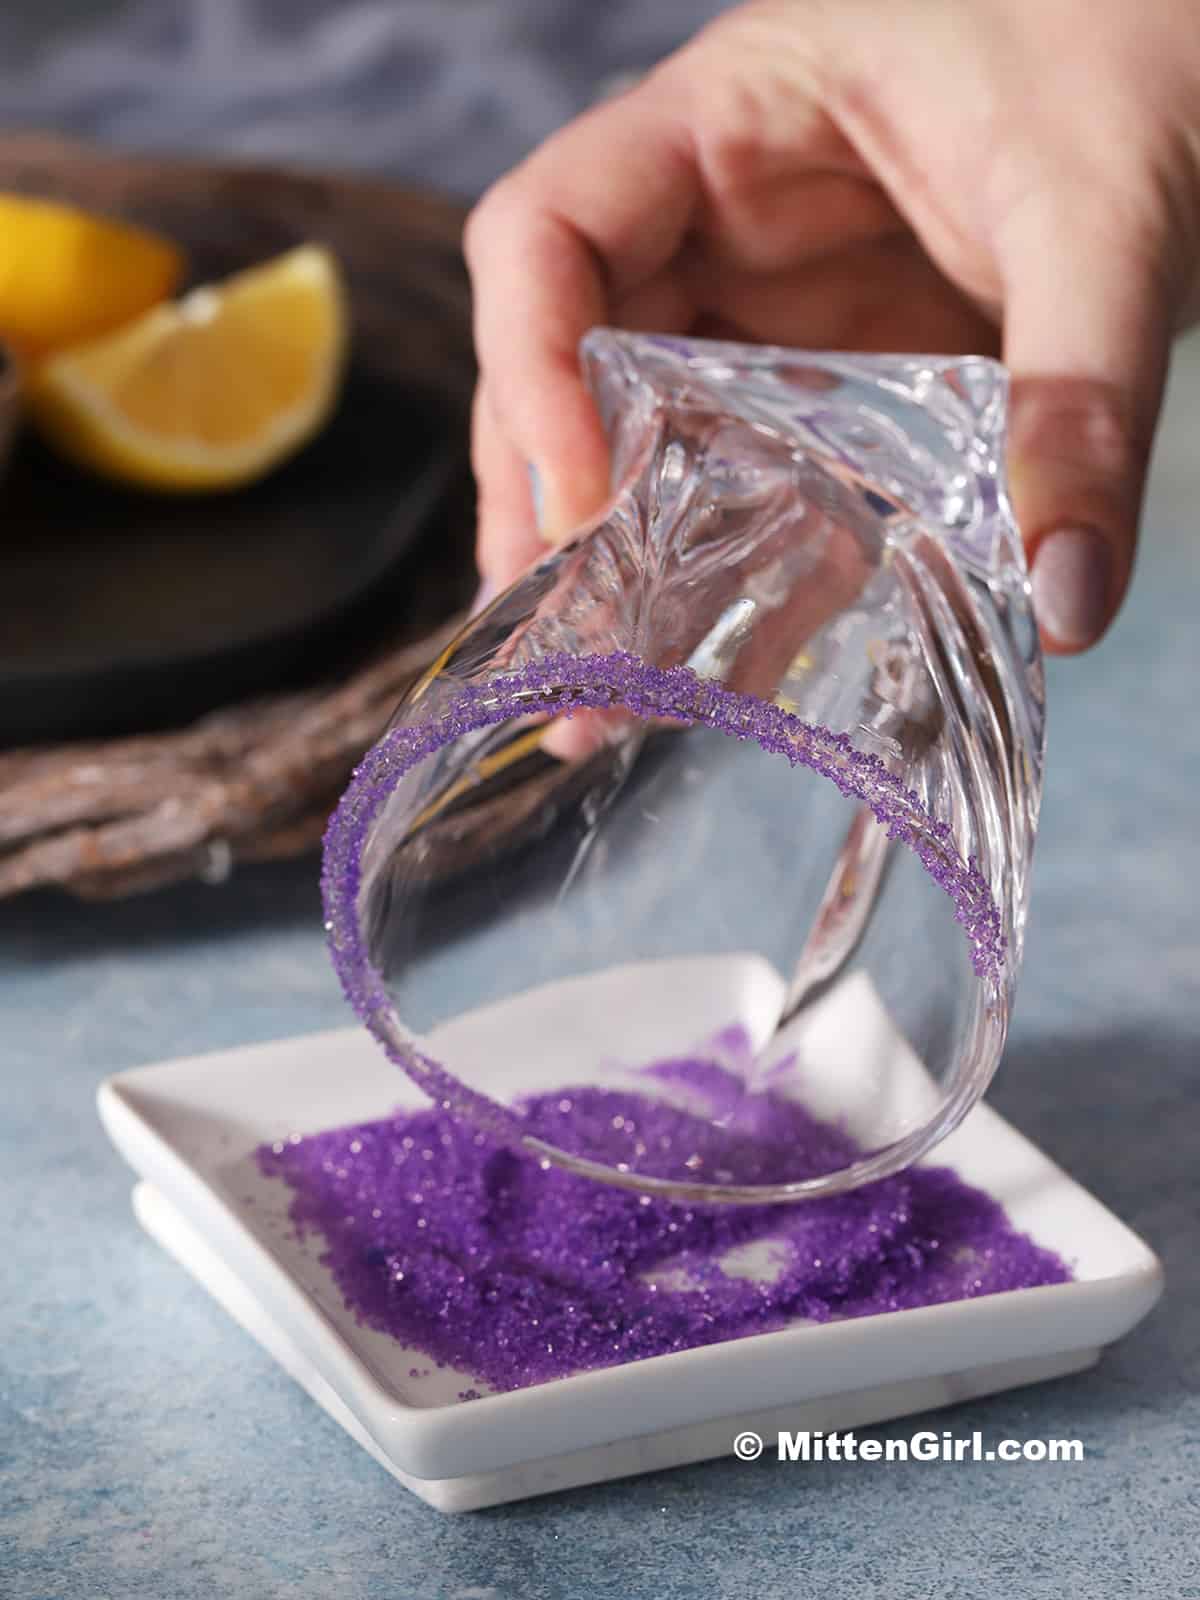 A hand rolling the rim of a glass in purple sugar.